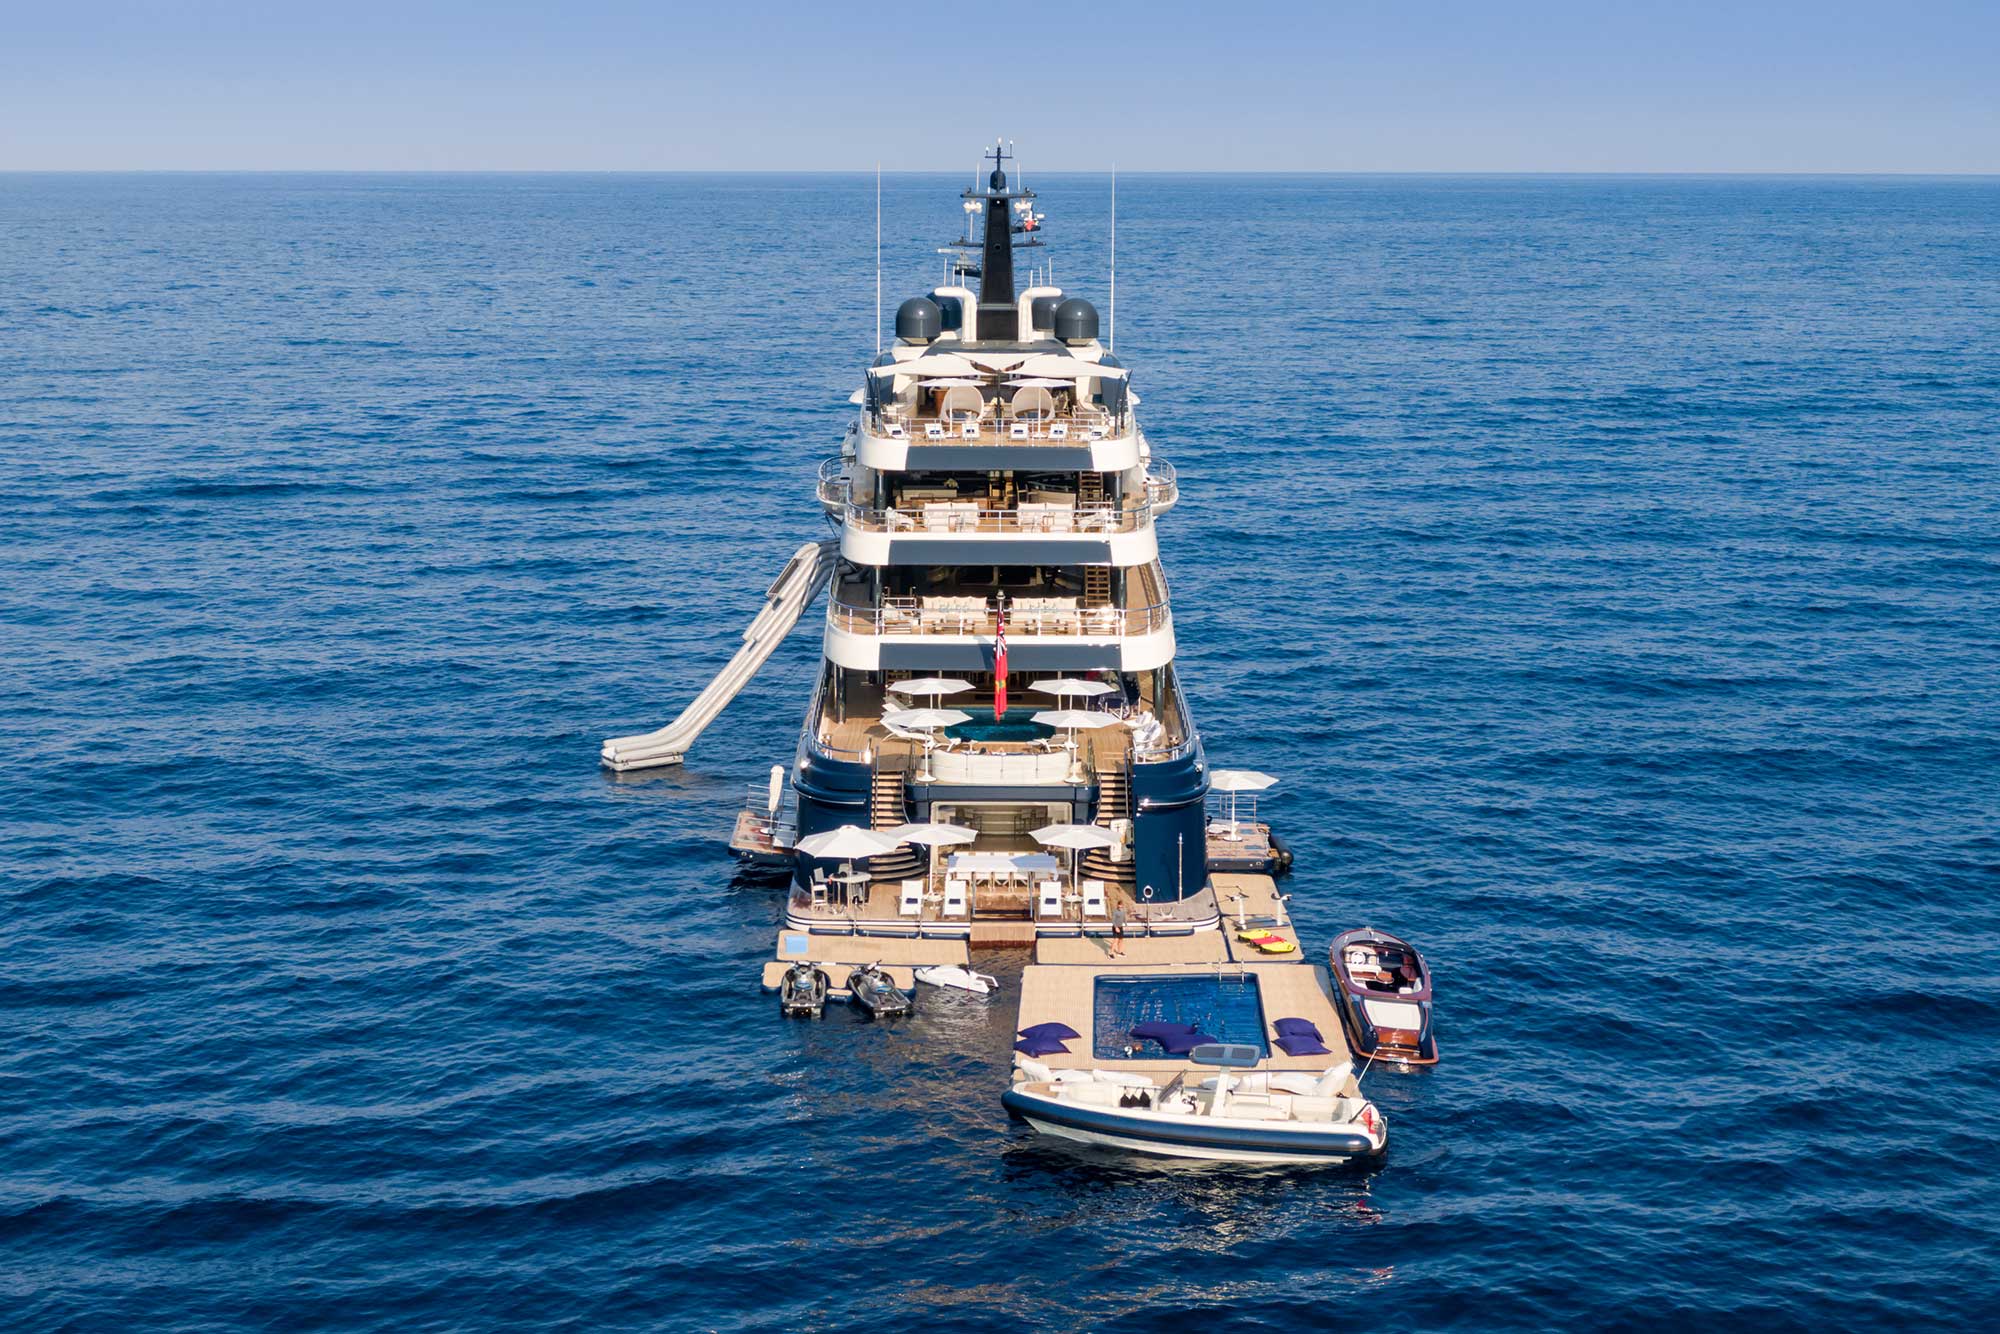 A large superyacht floating in the middle of the ocean, surrounded by luxurious tenders and toys.